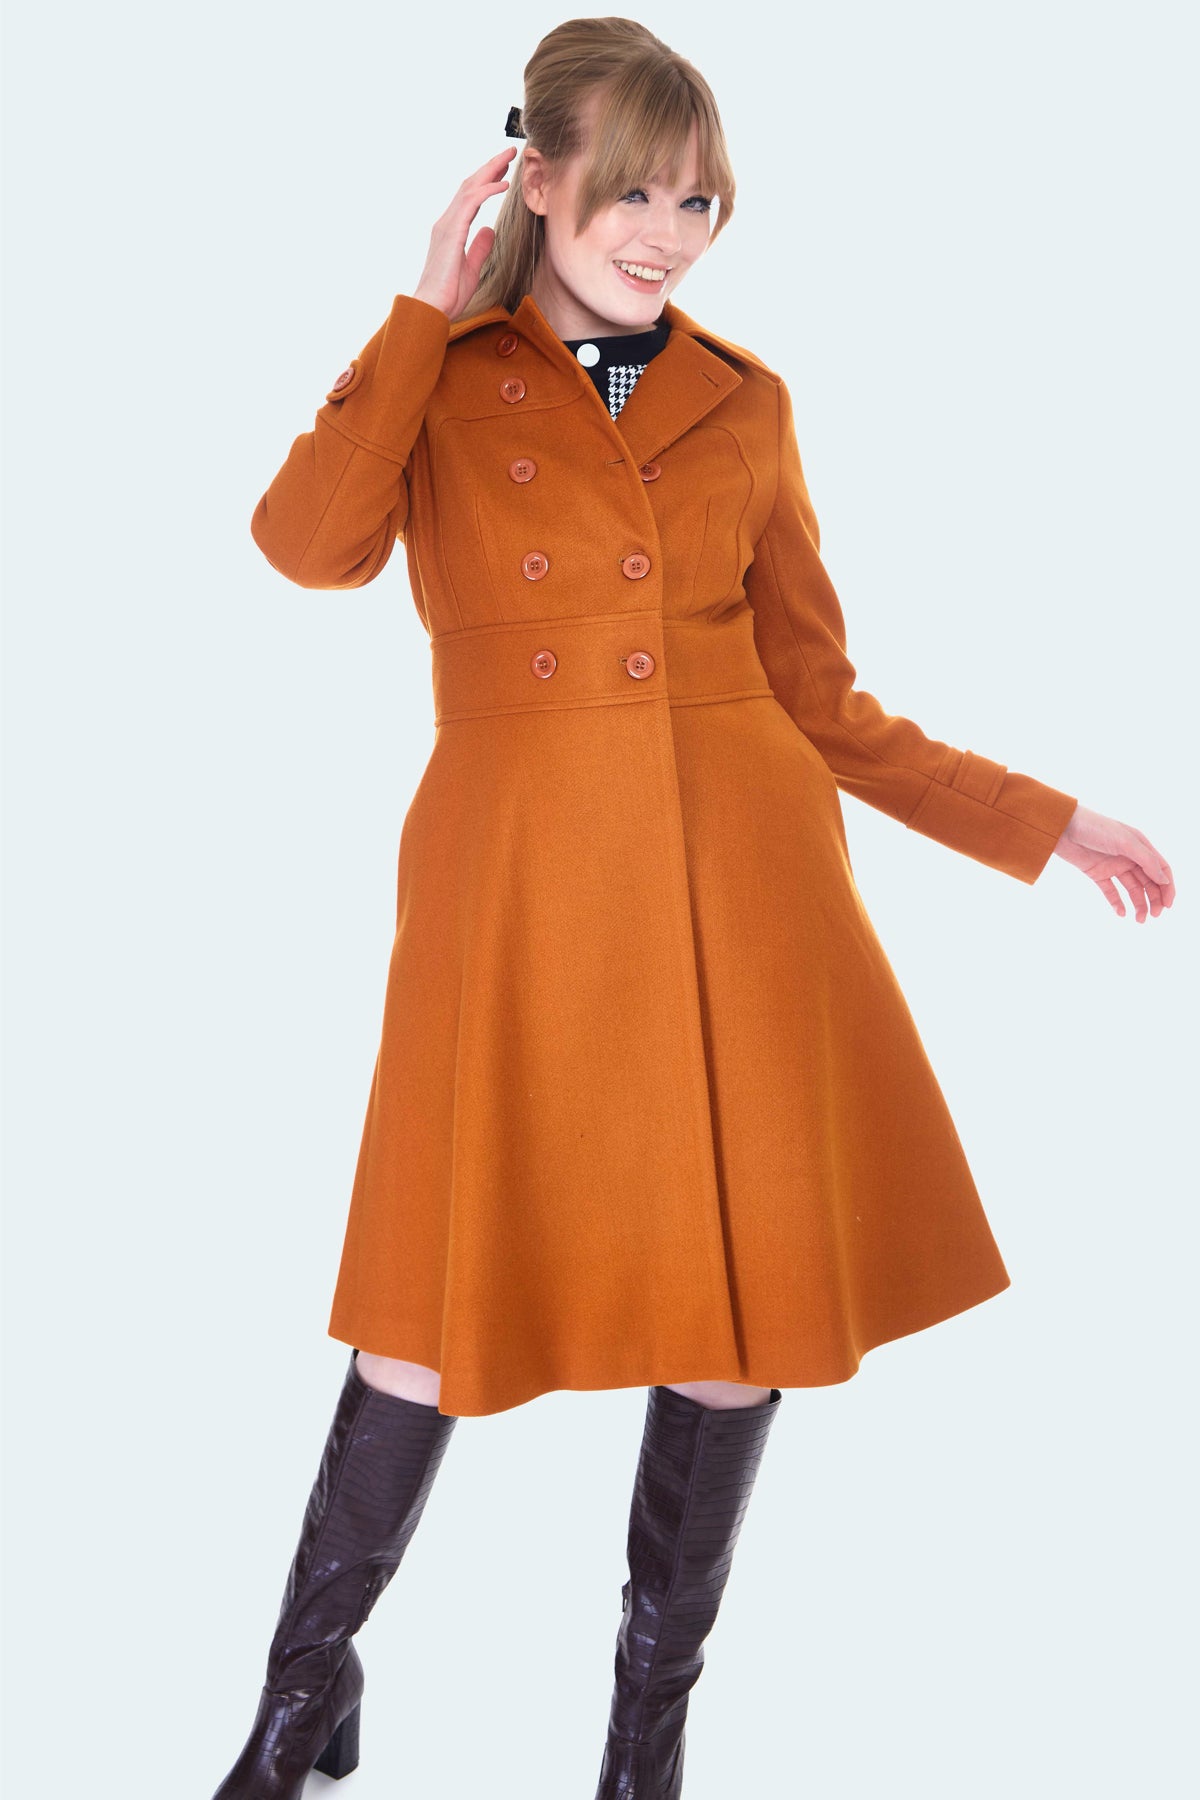 Burnt orange wool double breasted coat with fit and flare silhouette and pockets. Hits at knee. Shown on model